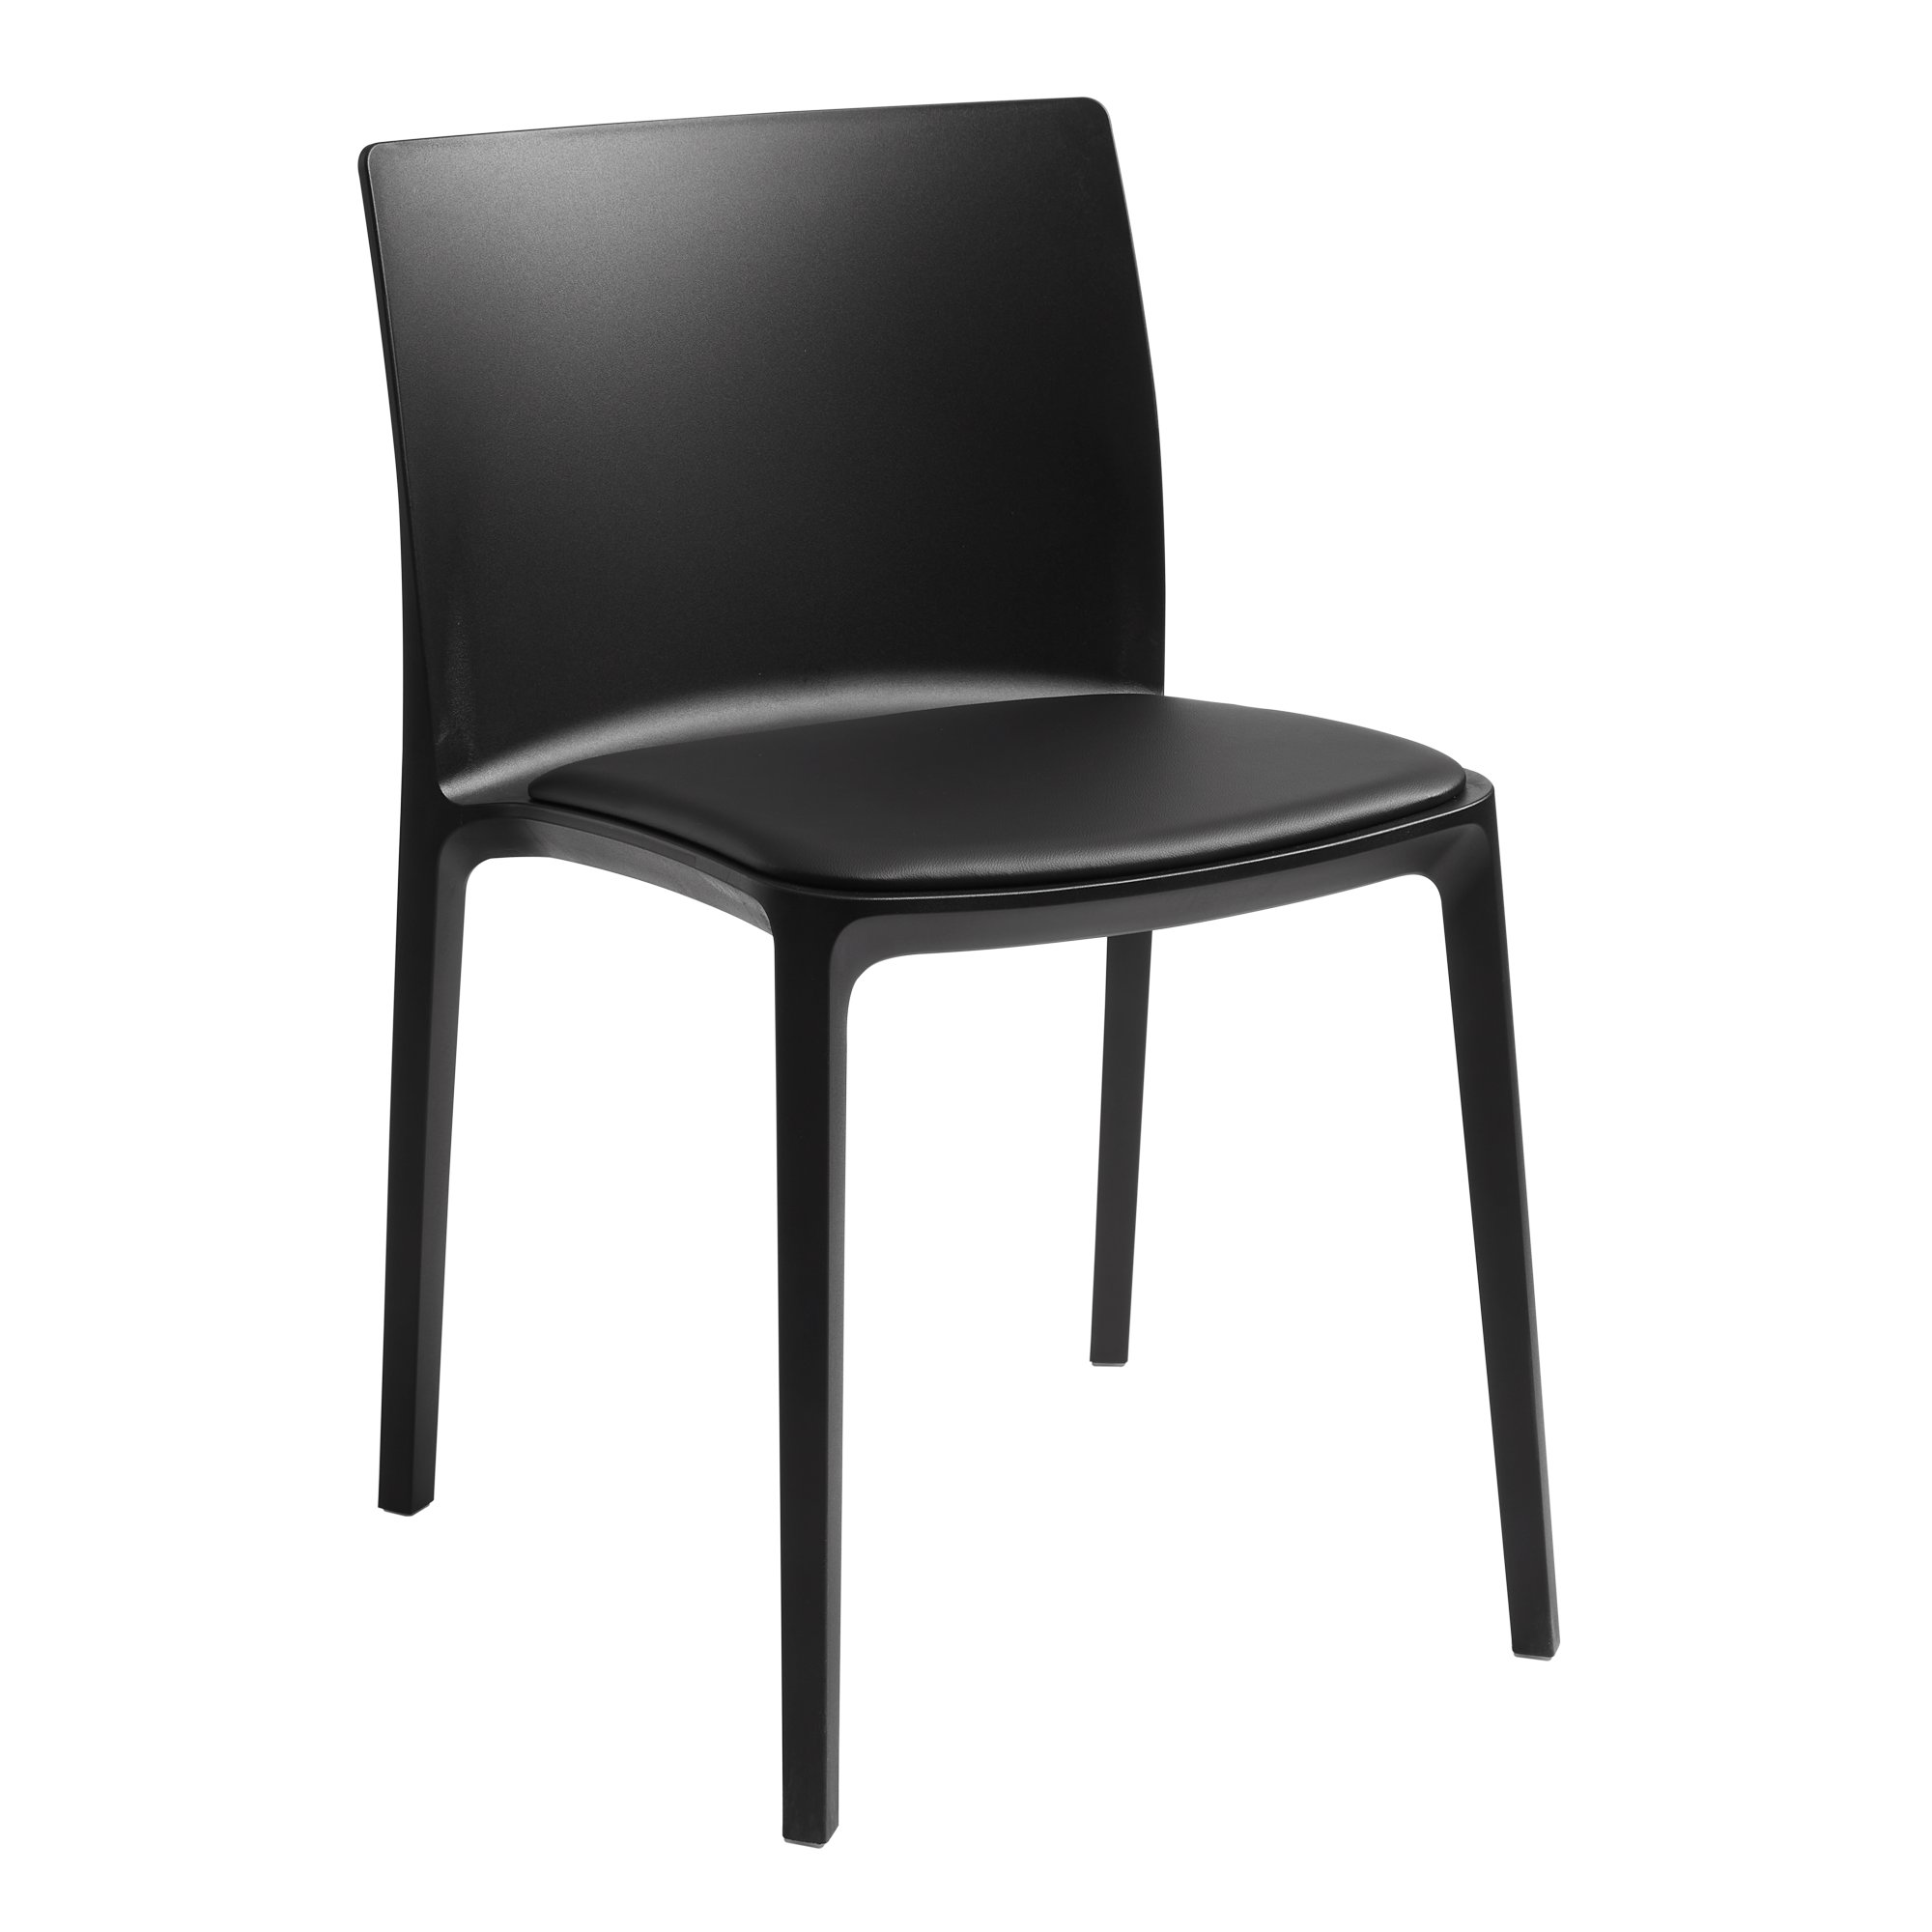 Black Ayrton Stackable Chair for Indoor and Outdoor Use